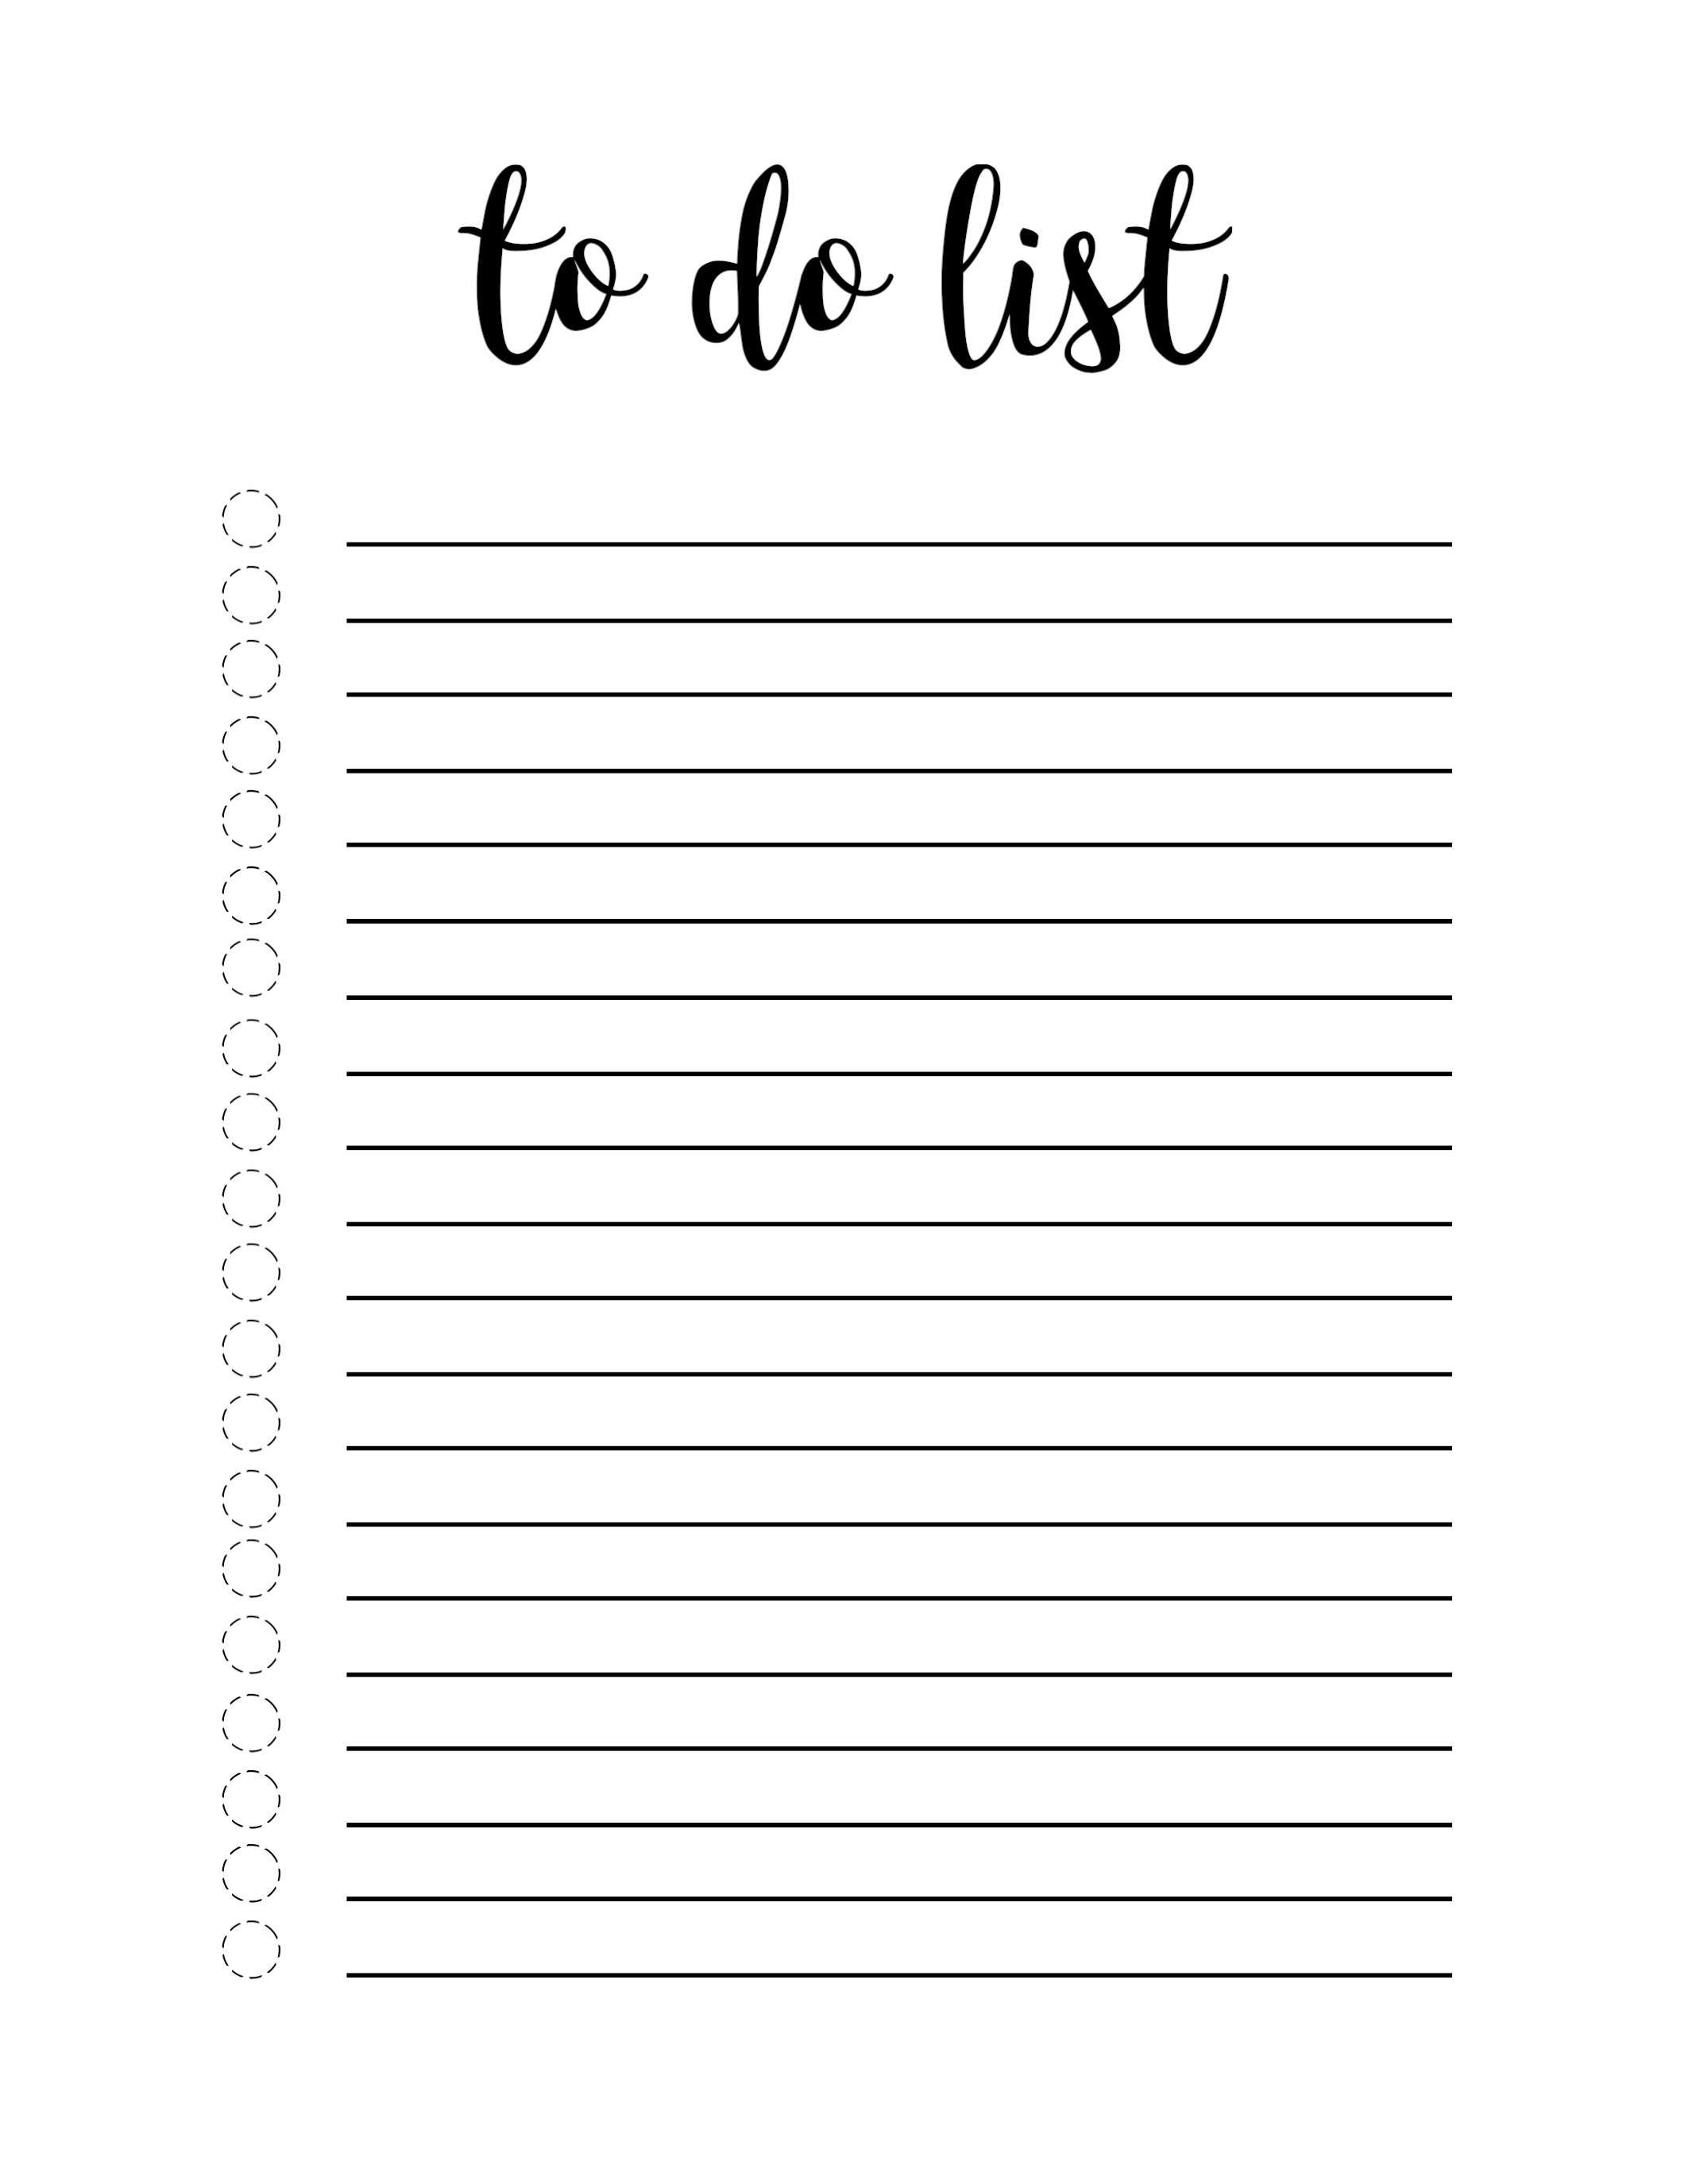 Free Printable Medication List Template from uroomsurf.com